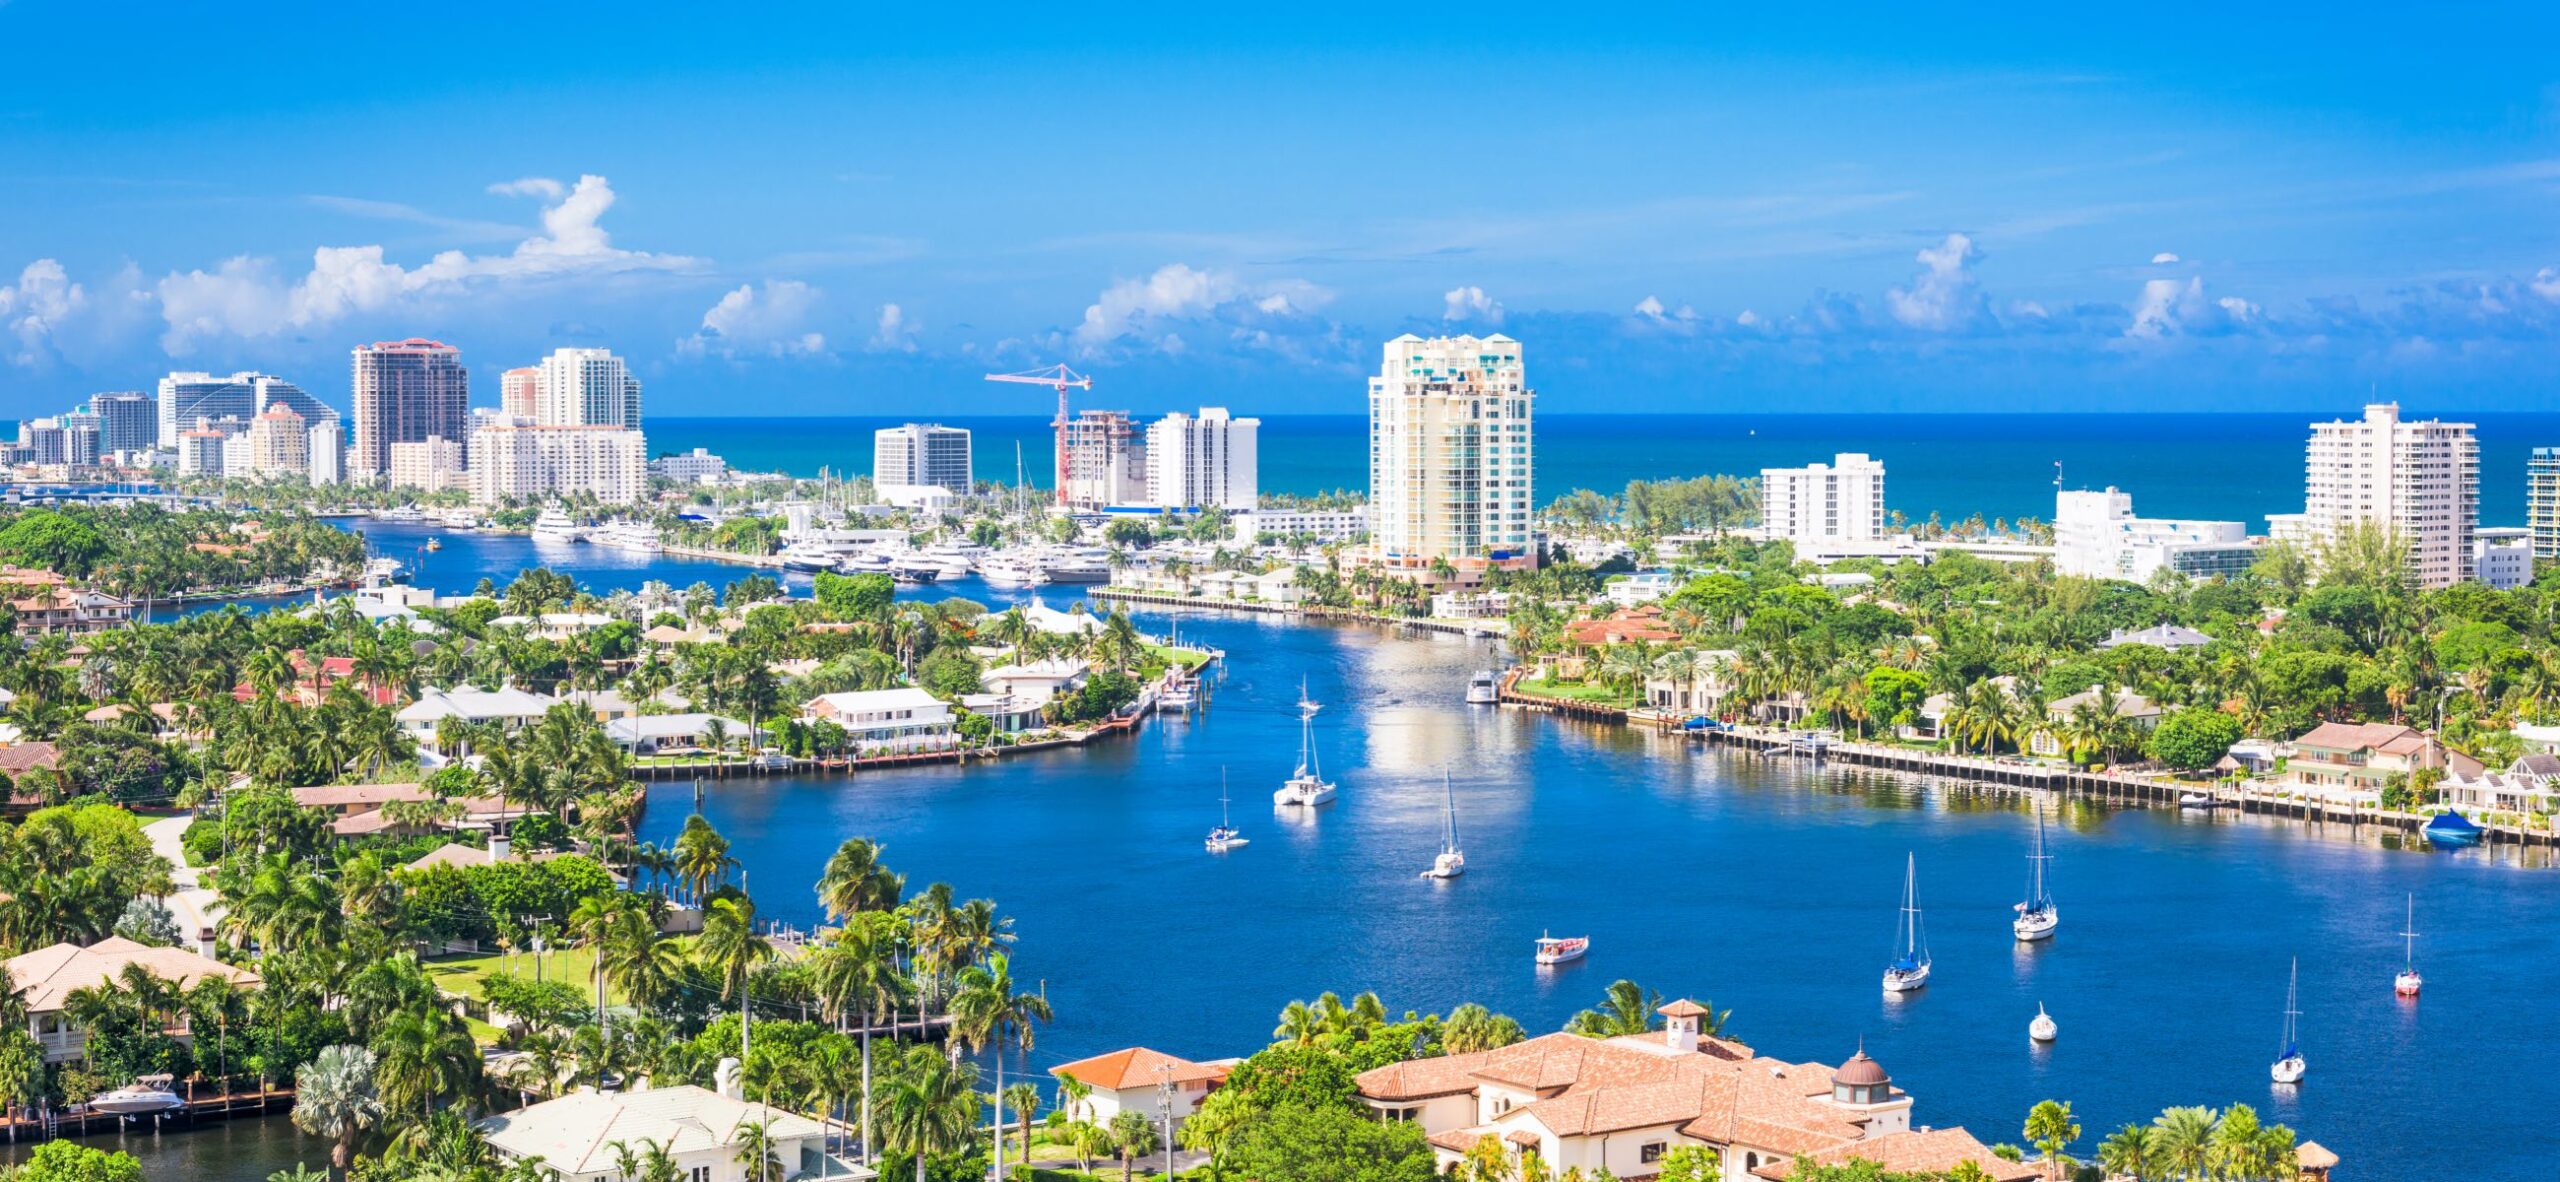 Fort-Lauderdale-The-New-Orlando-Looking-at-the-Best-Things-to-Do